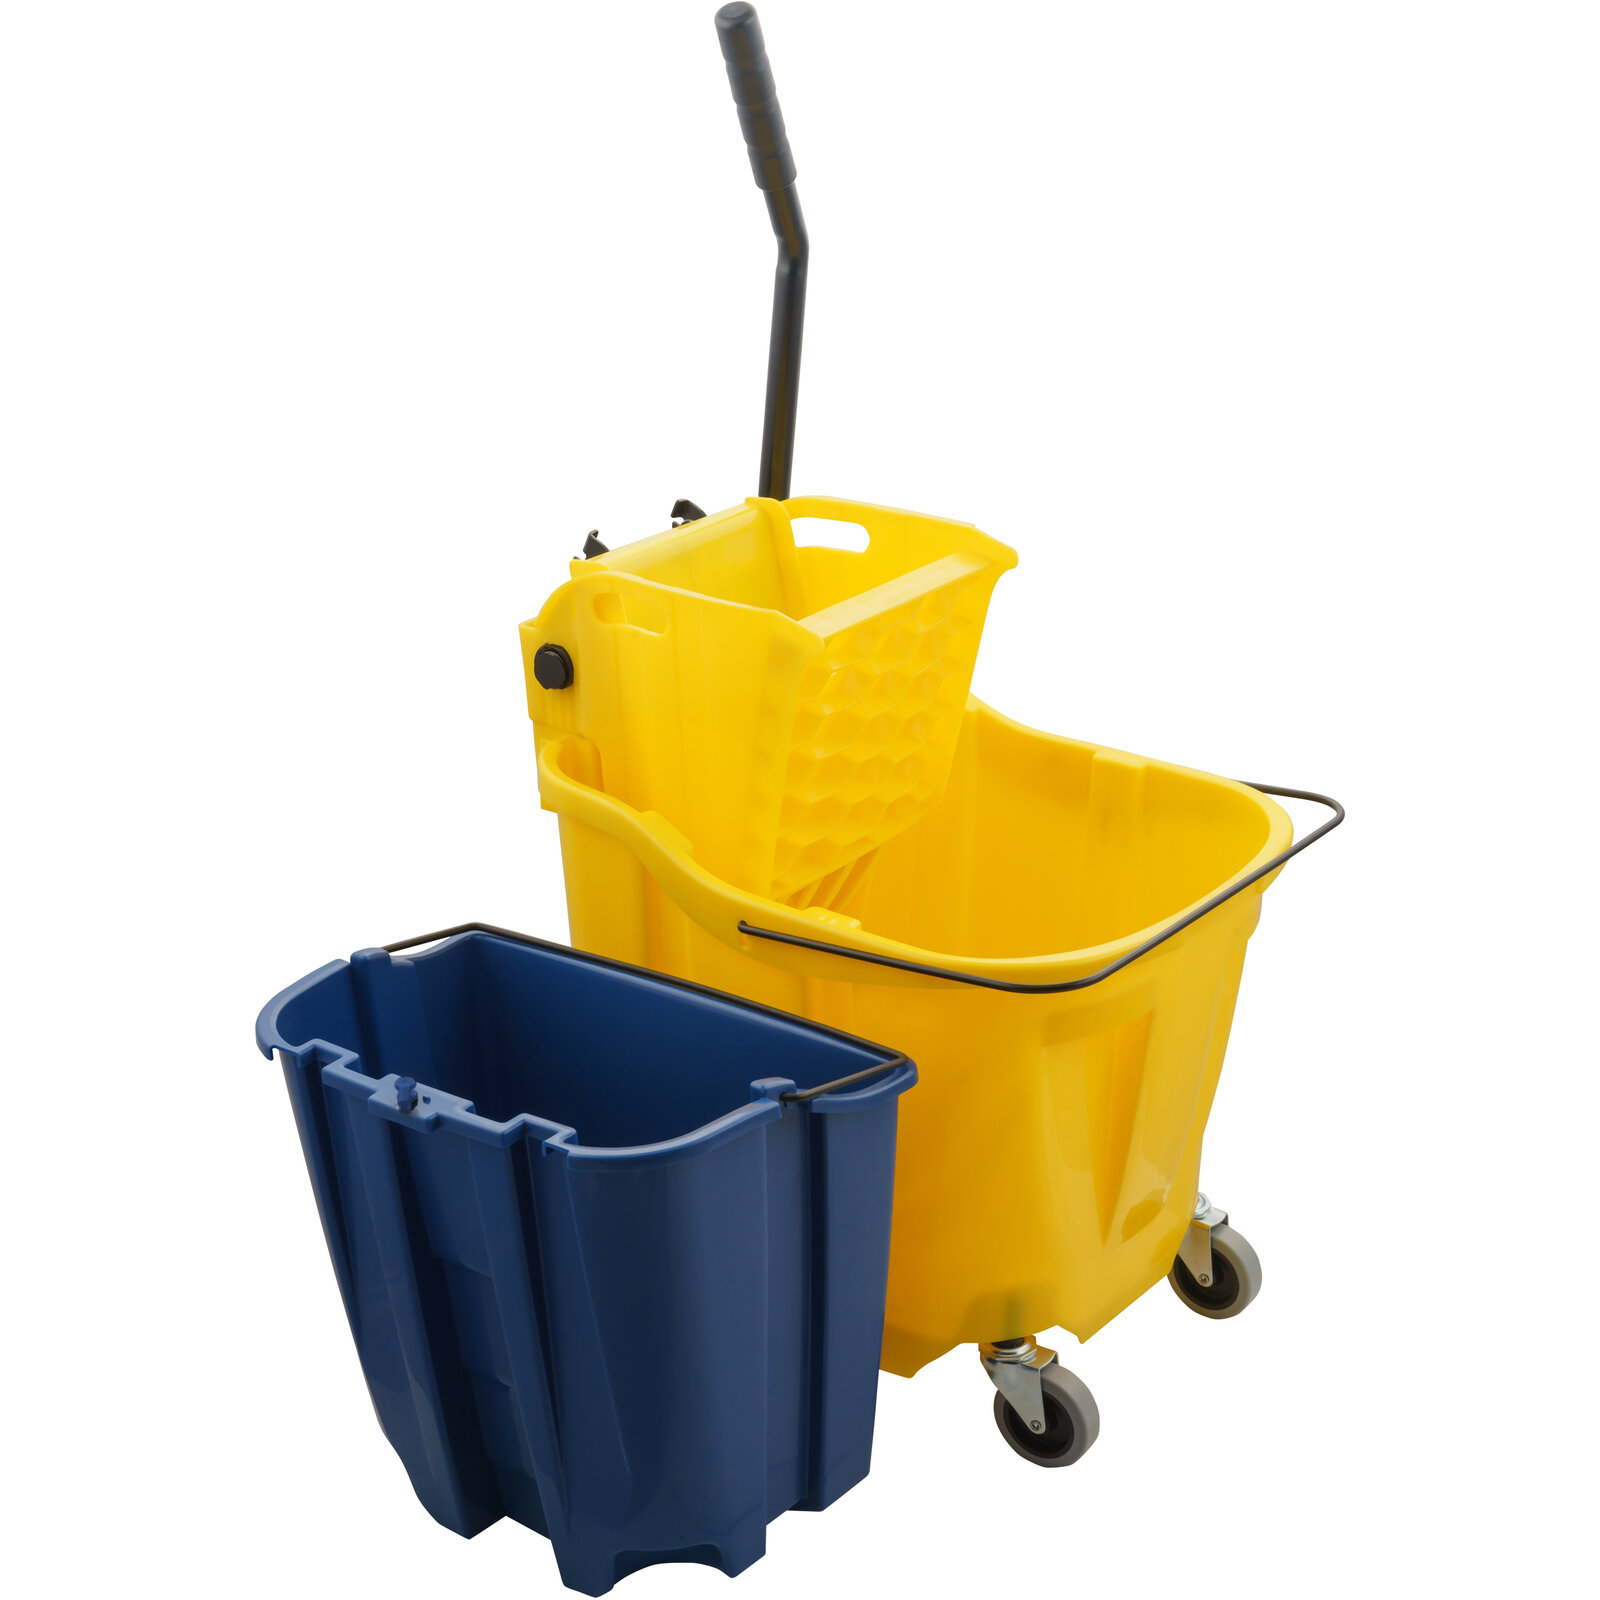 Mop Bucket with Ringer - 17.5 Qt - Lodging Kit Company